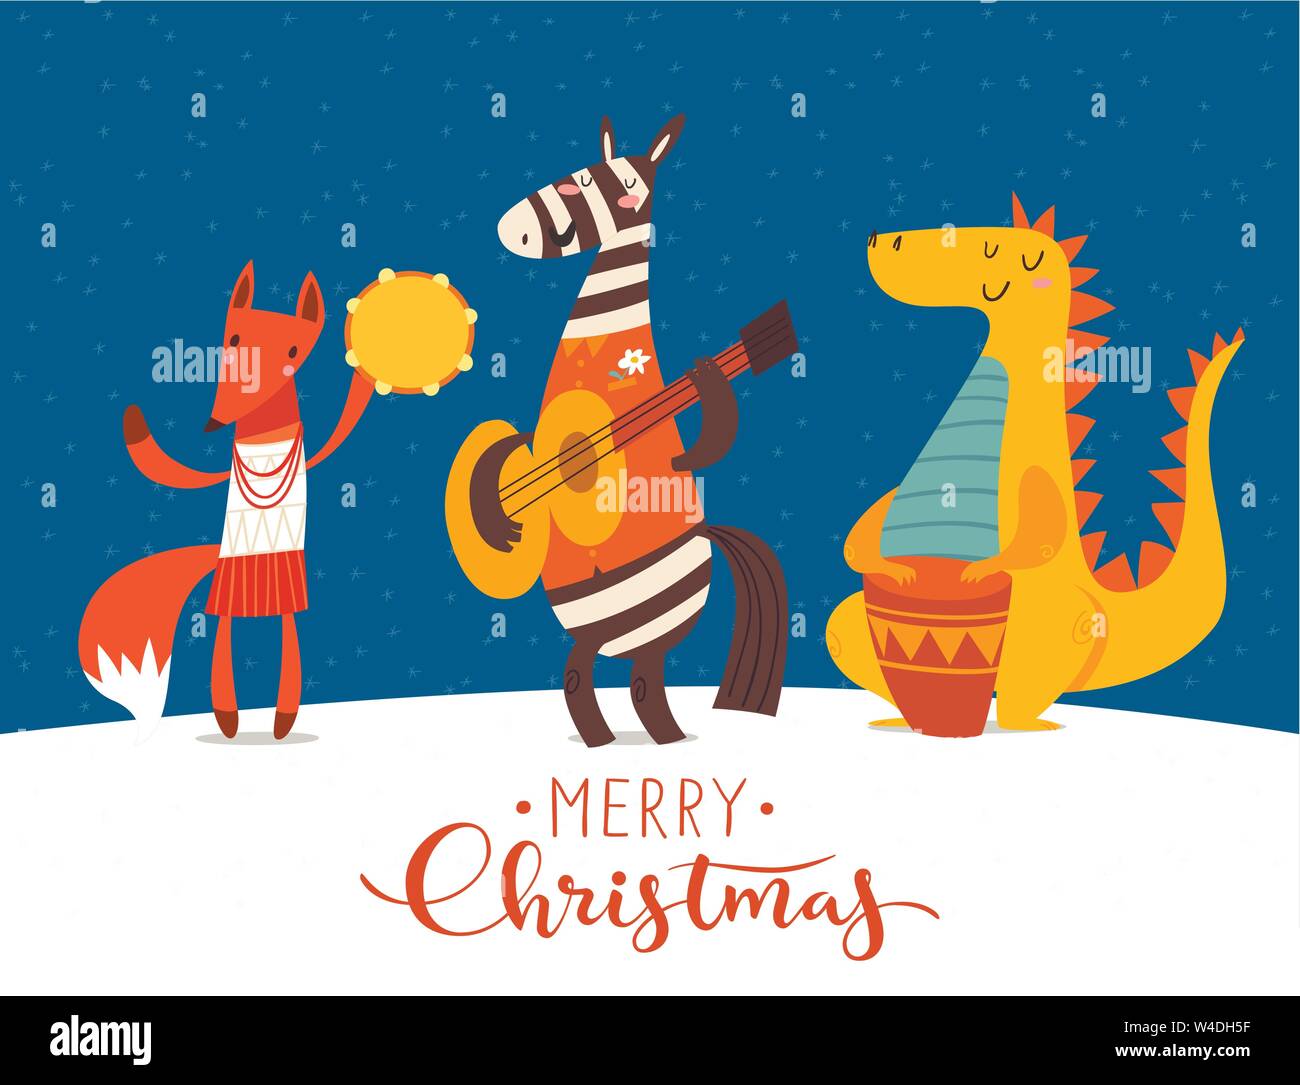 Christmas party jazz vector poster with funny cartoon musicians. Stock Vector